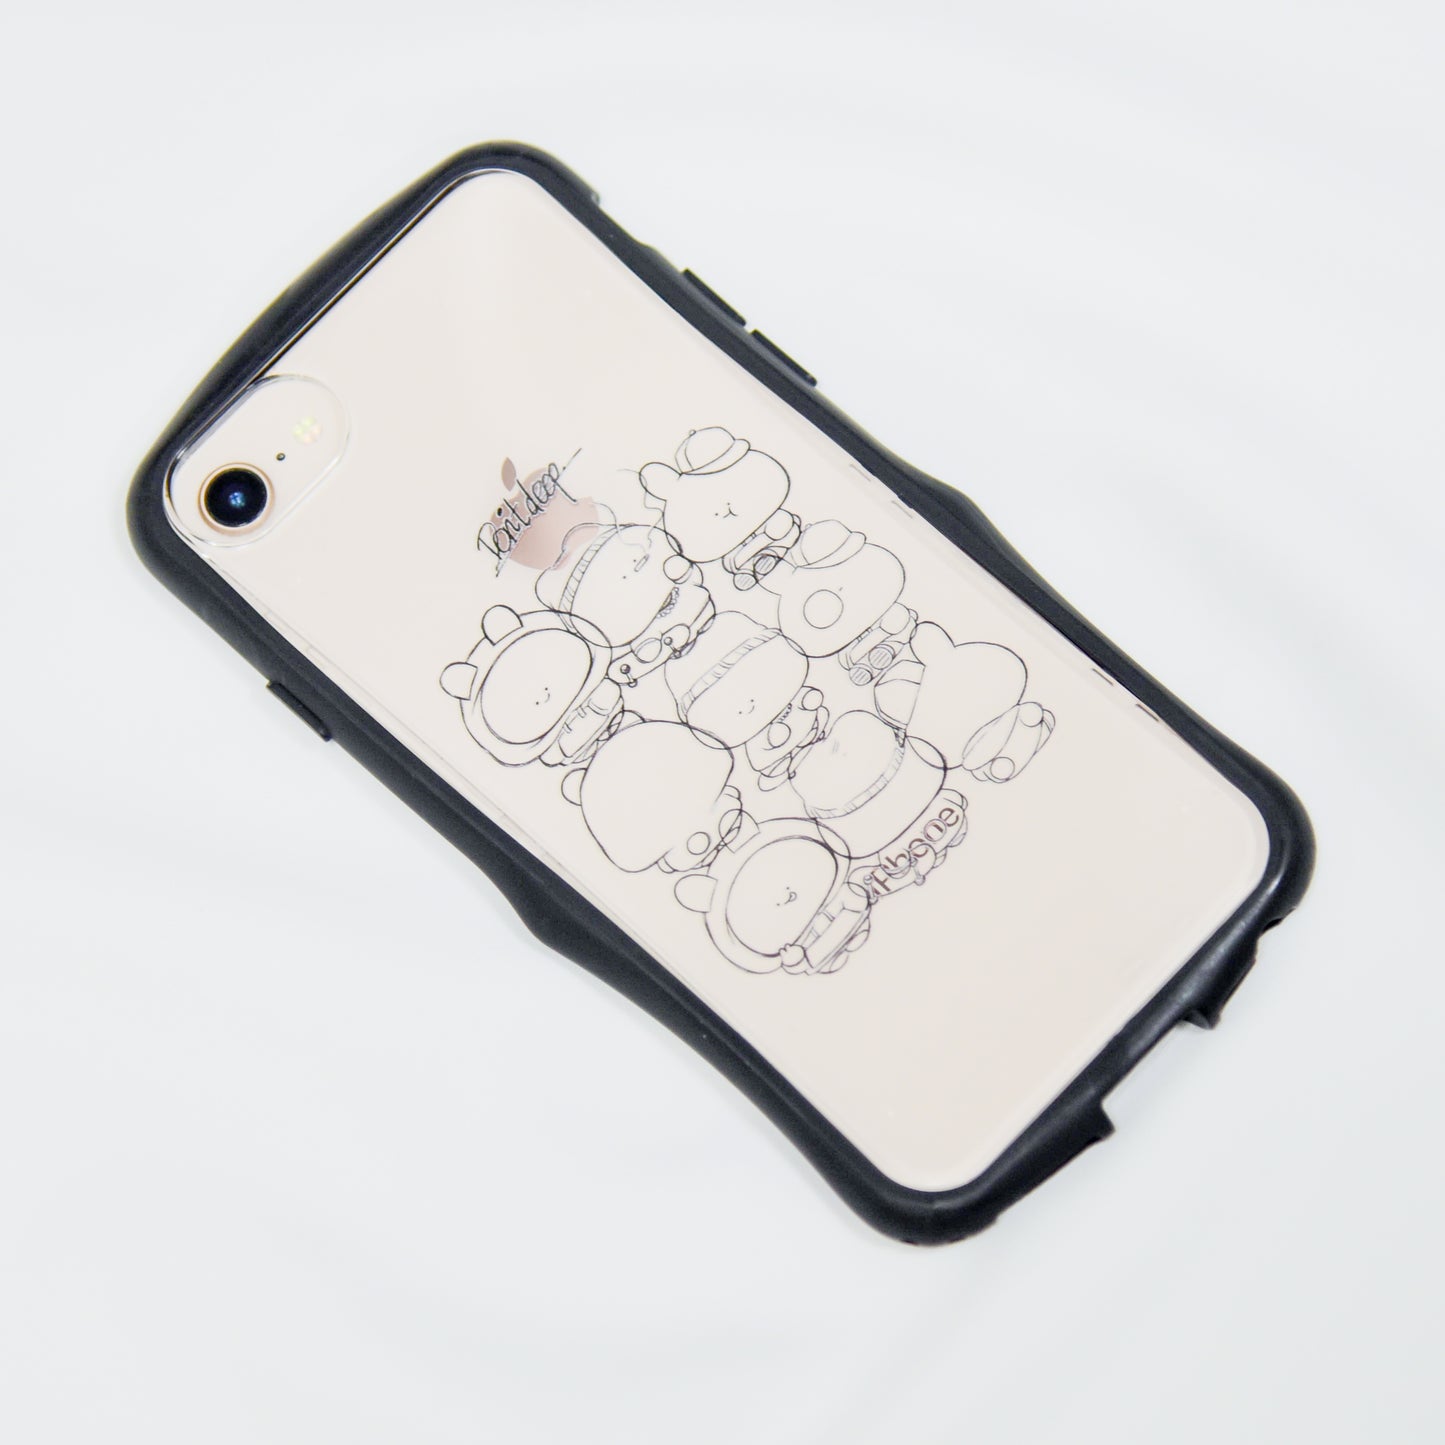 [Asamimi-chan] Dress-up bumper case for iPhone [Made to order]